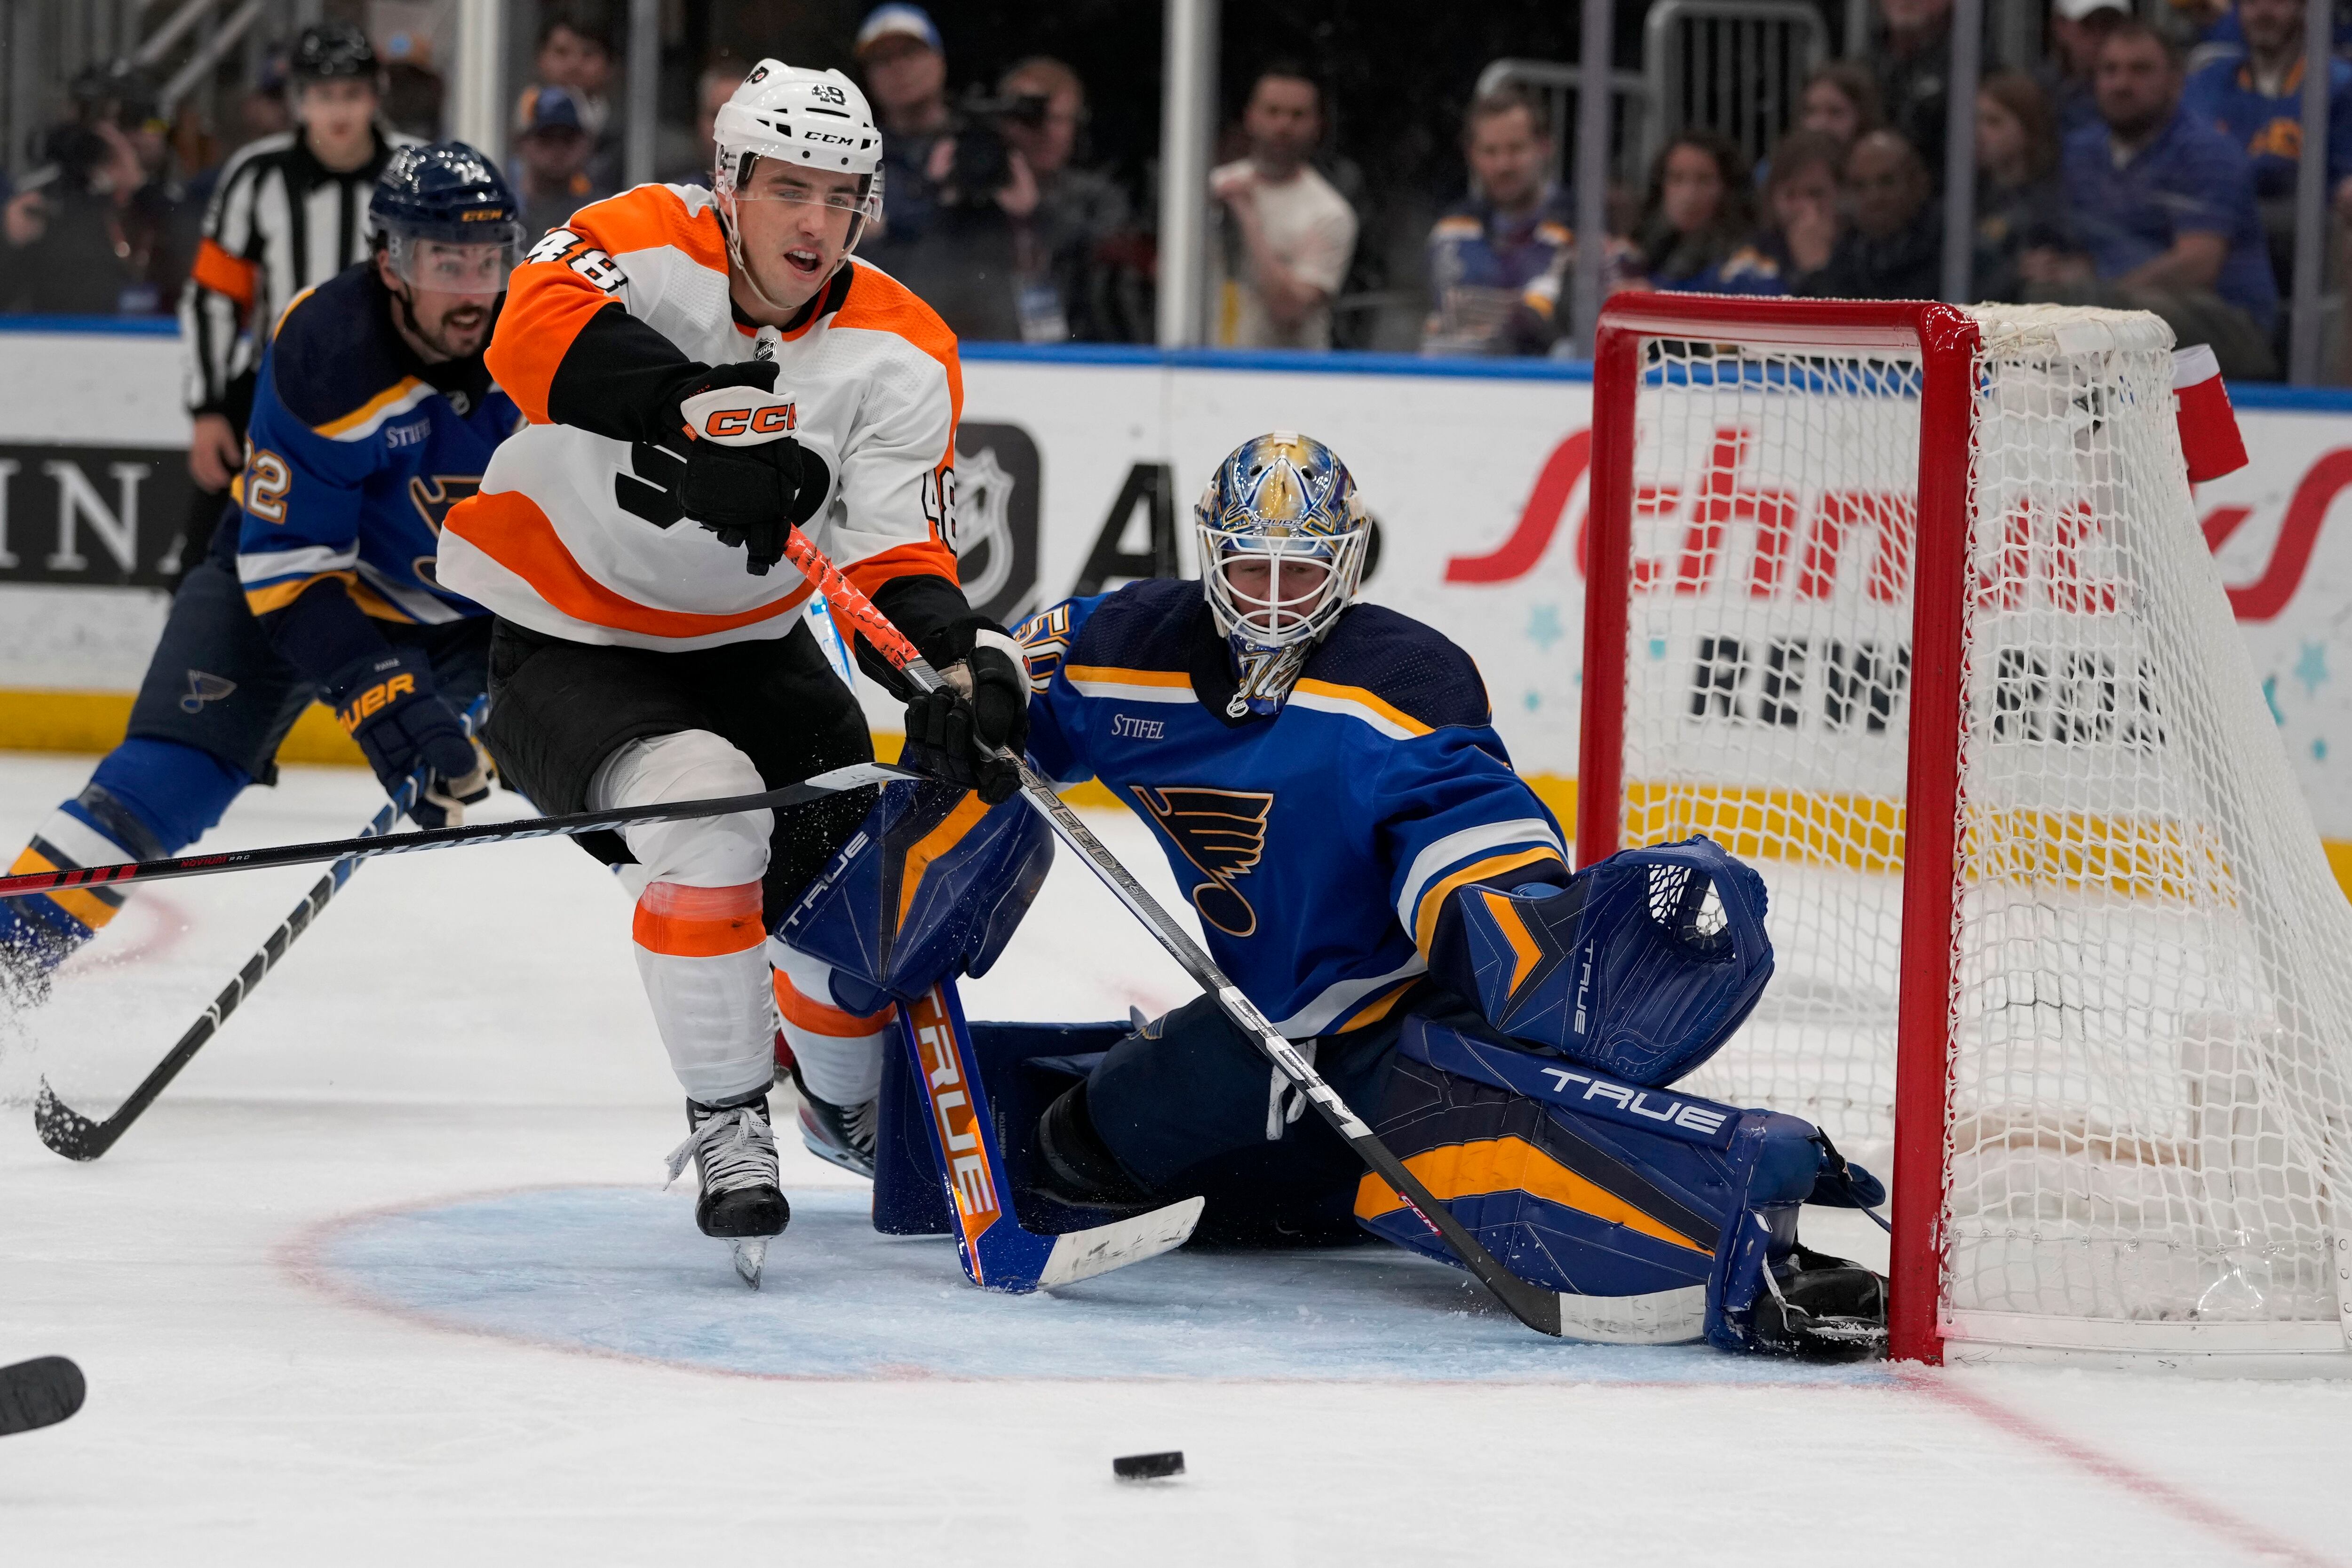 Continued 'lack of offense' sinks Flyers again – NBC Sports